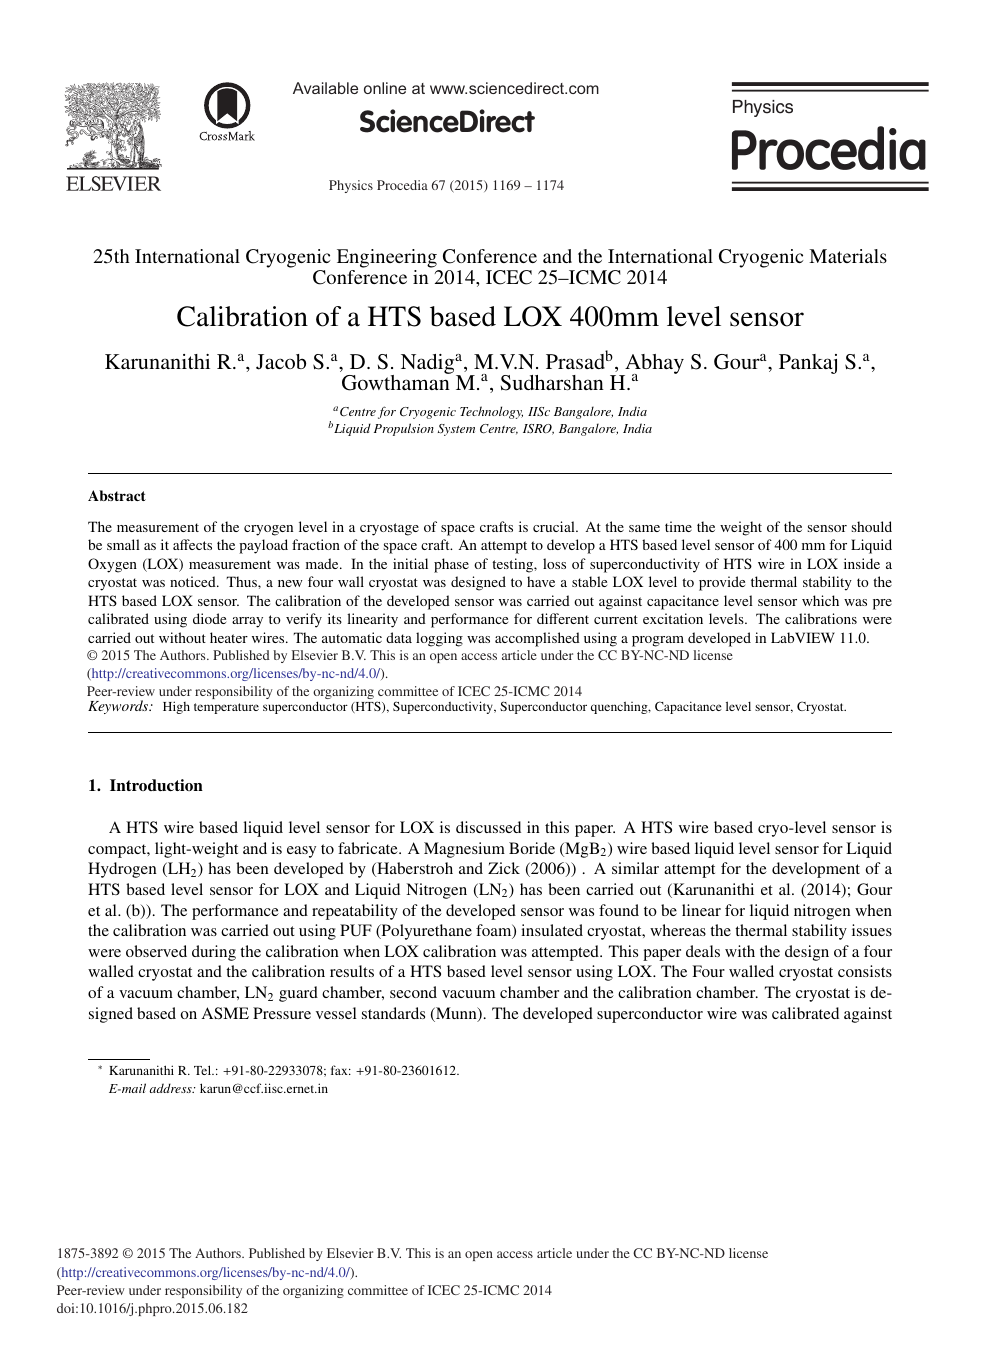 Calibration Of A Hts Based Lox 400mm Level Sensor Topic Of Research Paper In Materials Engineering Download Scholarly Article Pdf And Read For Free On Cyberleninka Open Science Hub